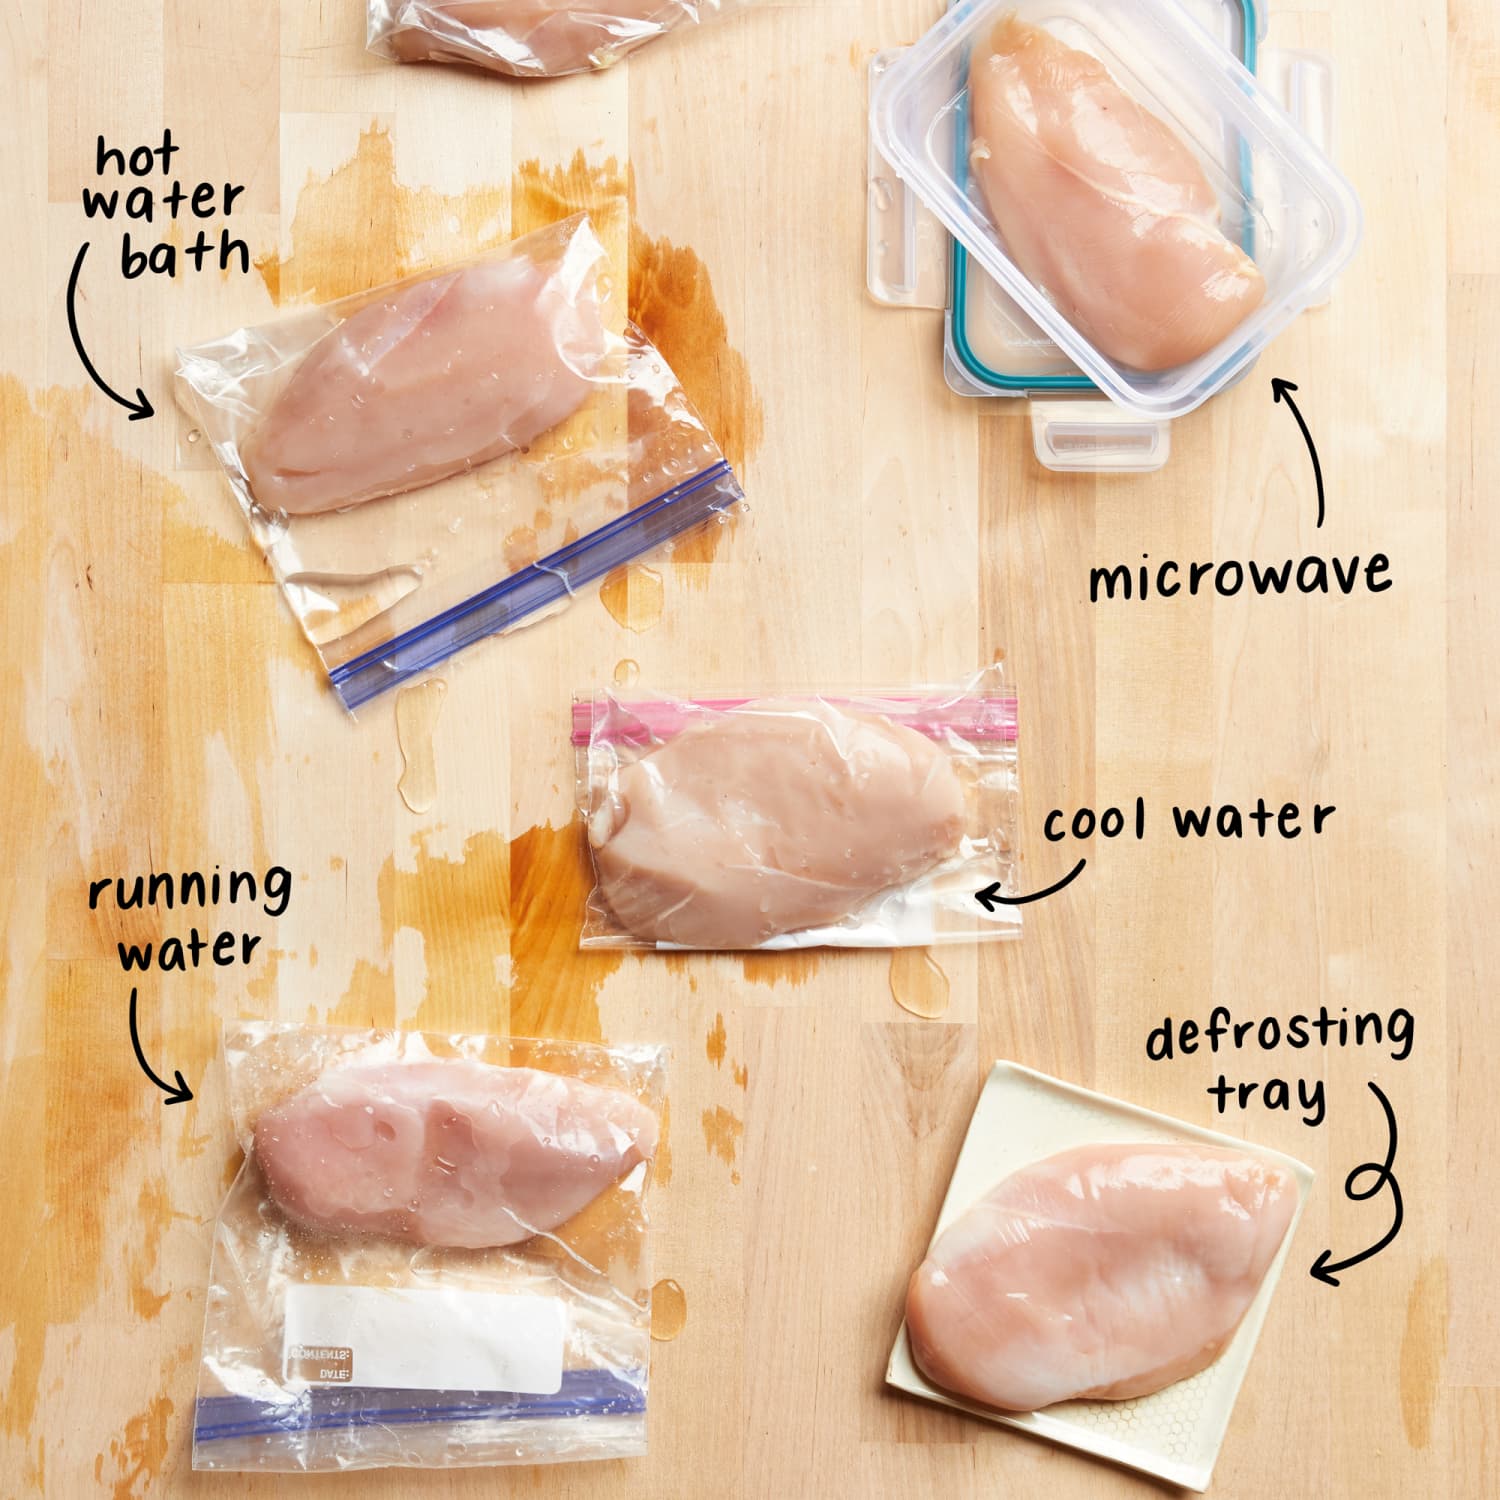 How to Safely Defrost Chicken (6 Methods) | Kitchn